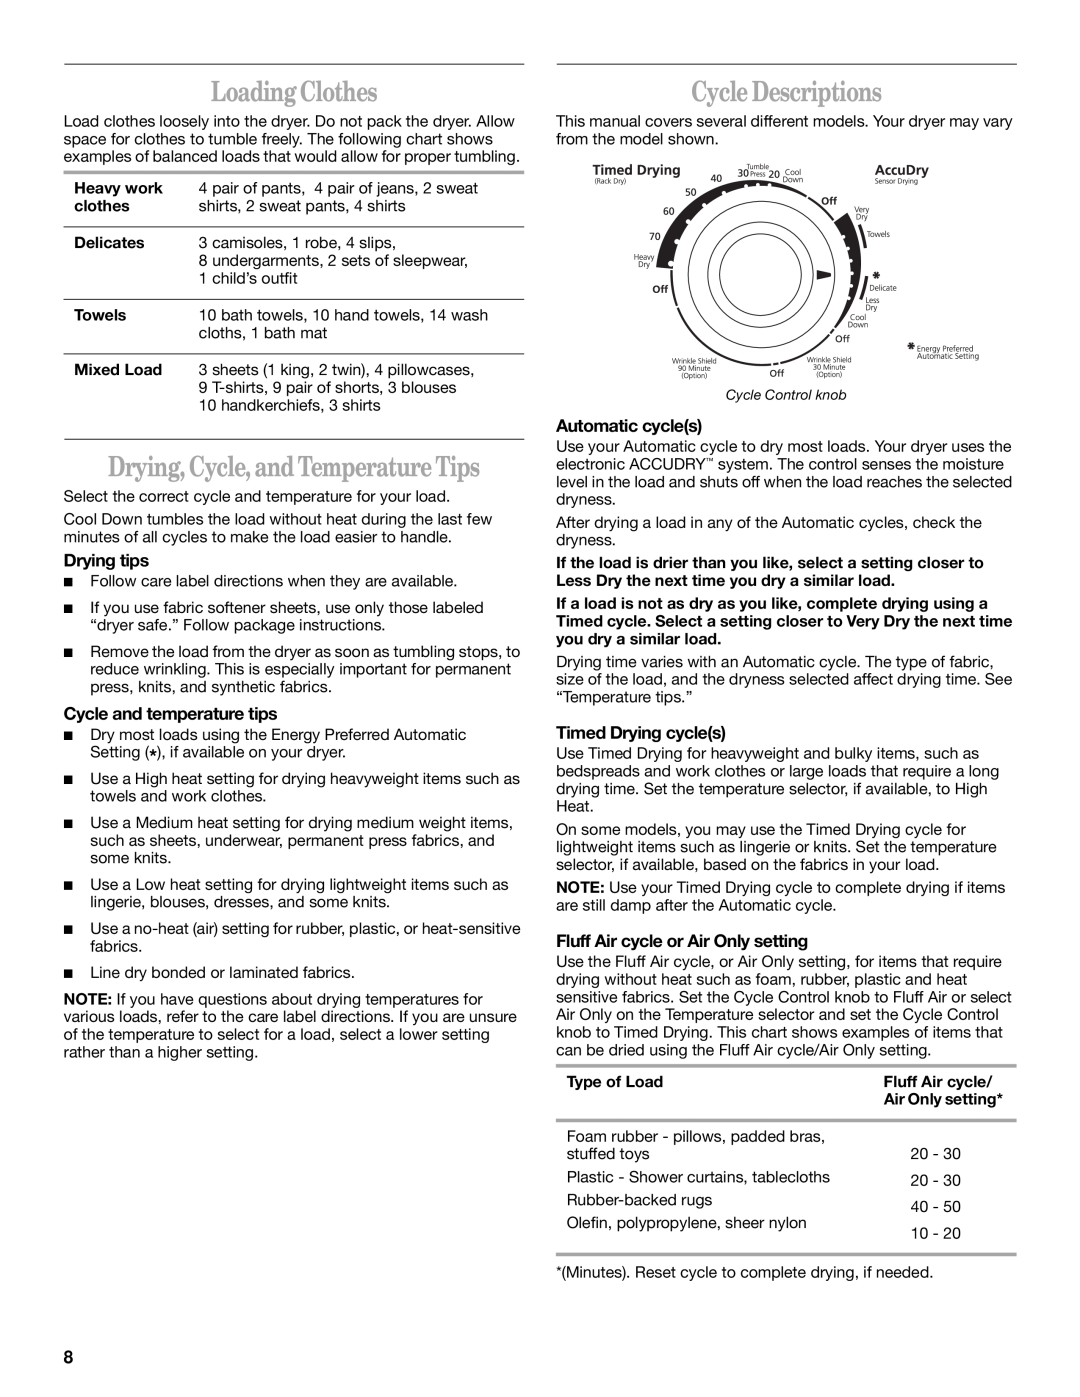 Whirlpool 8529302 Loading Clothes, Drying, Cycle, and Temperature Tips, Cycle Descriptions, Drying tips, Automatic cycles 